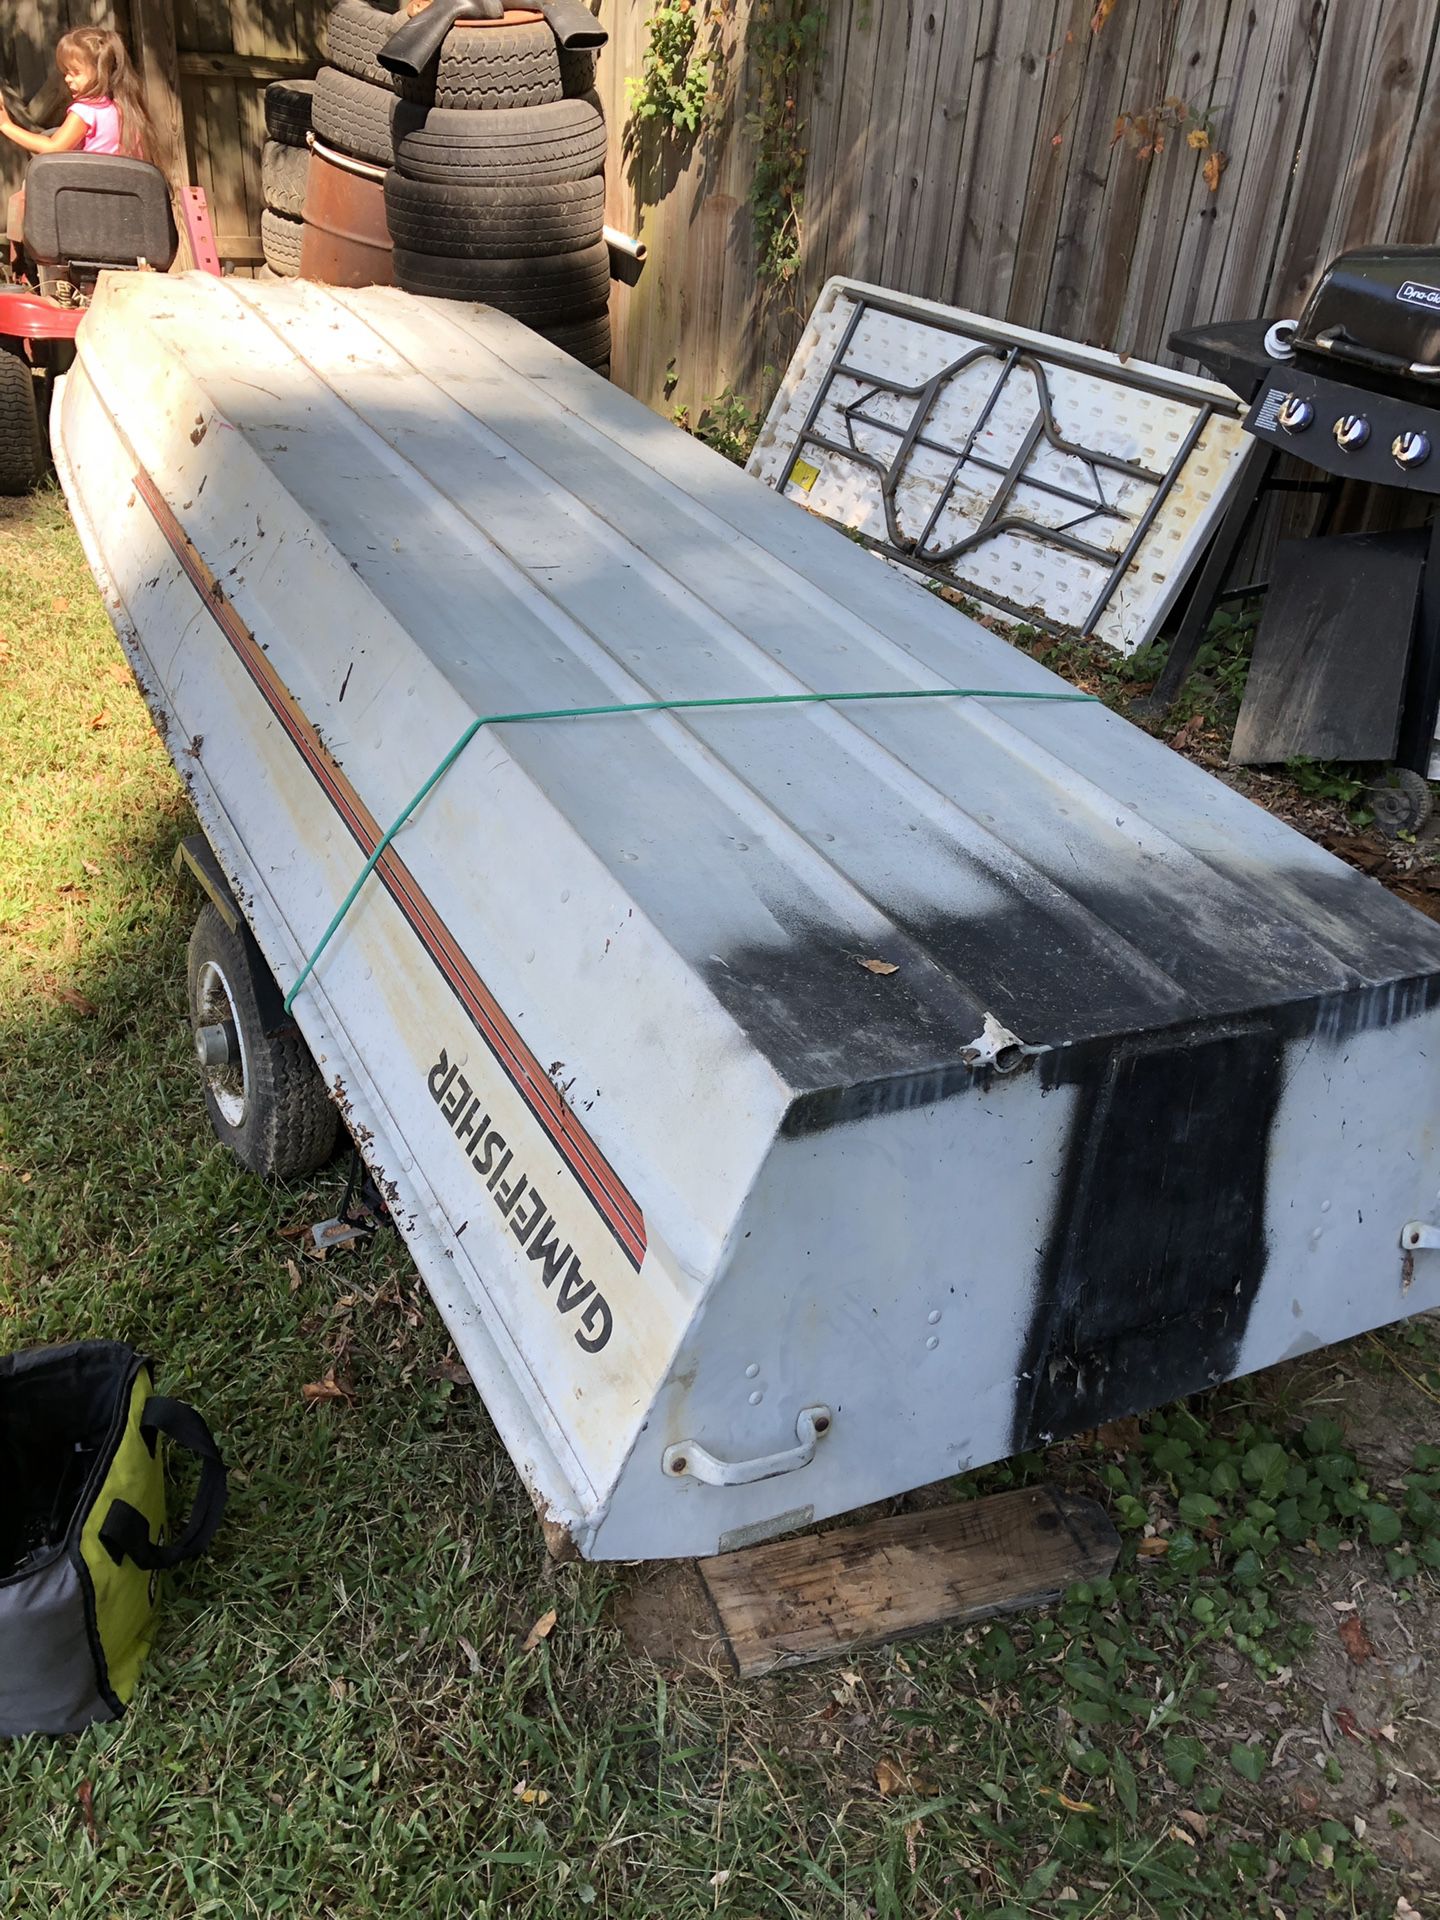 13 feet John Boat, very good condition. Comes with battery , trailer on motor